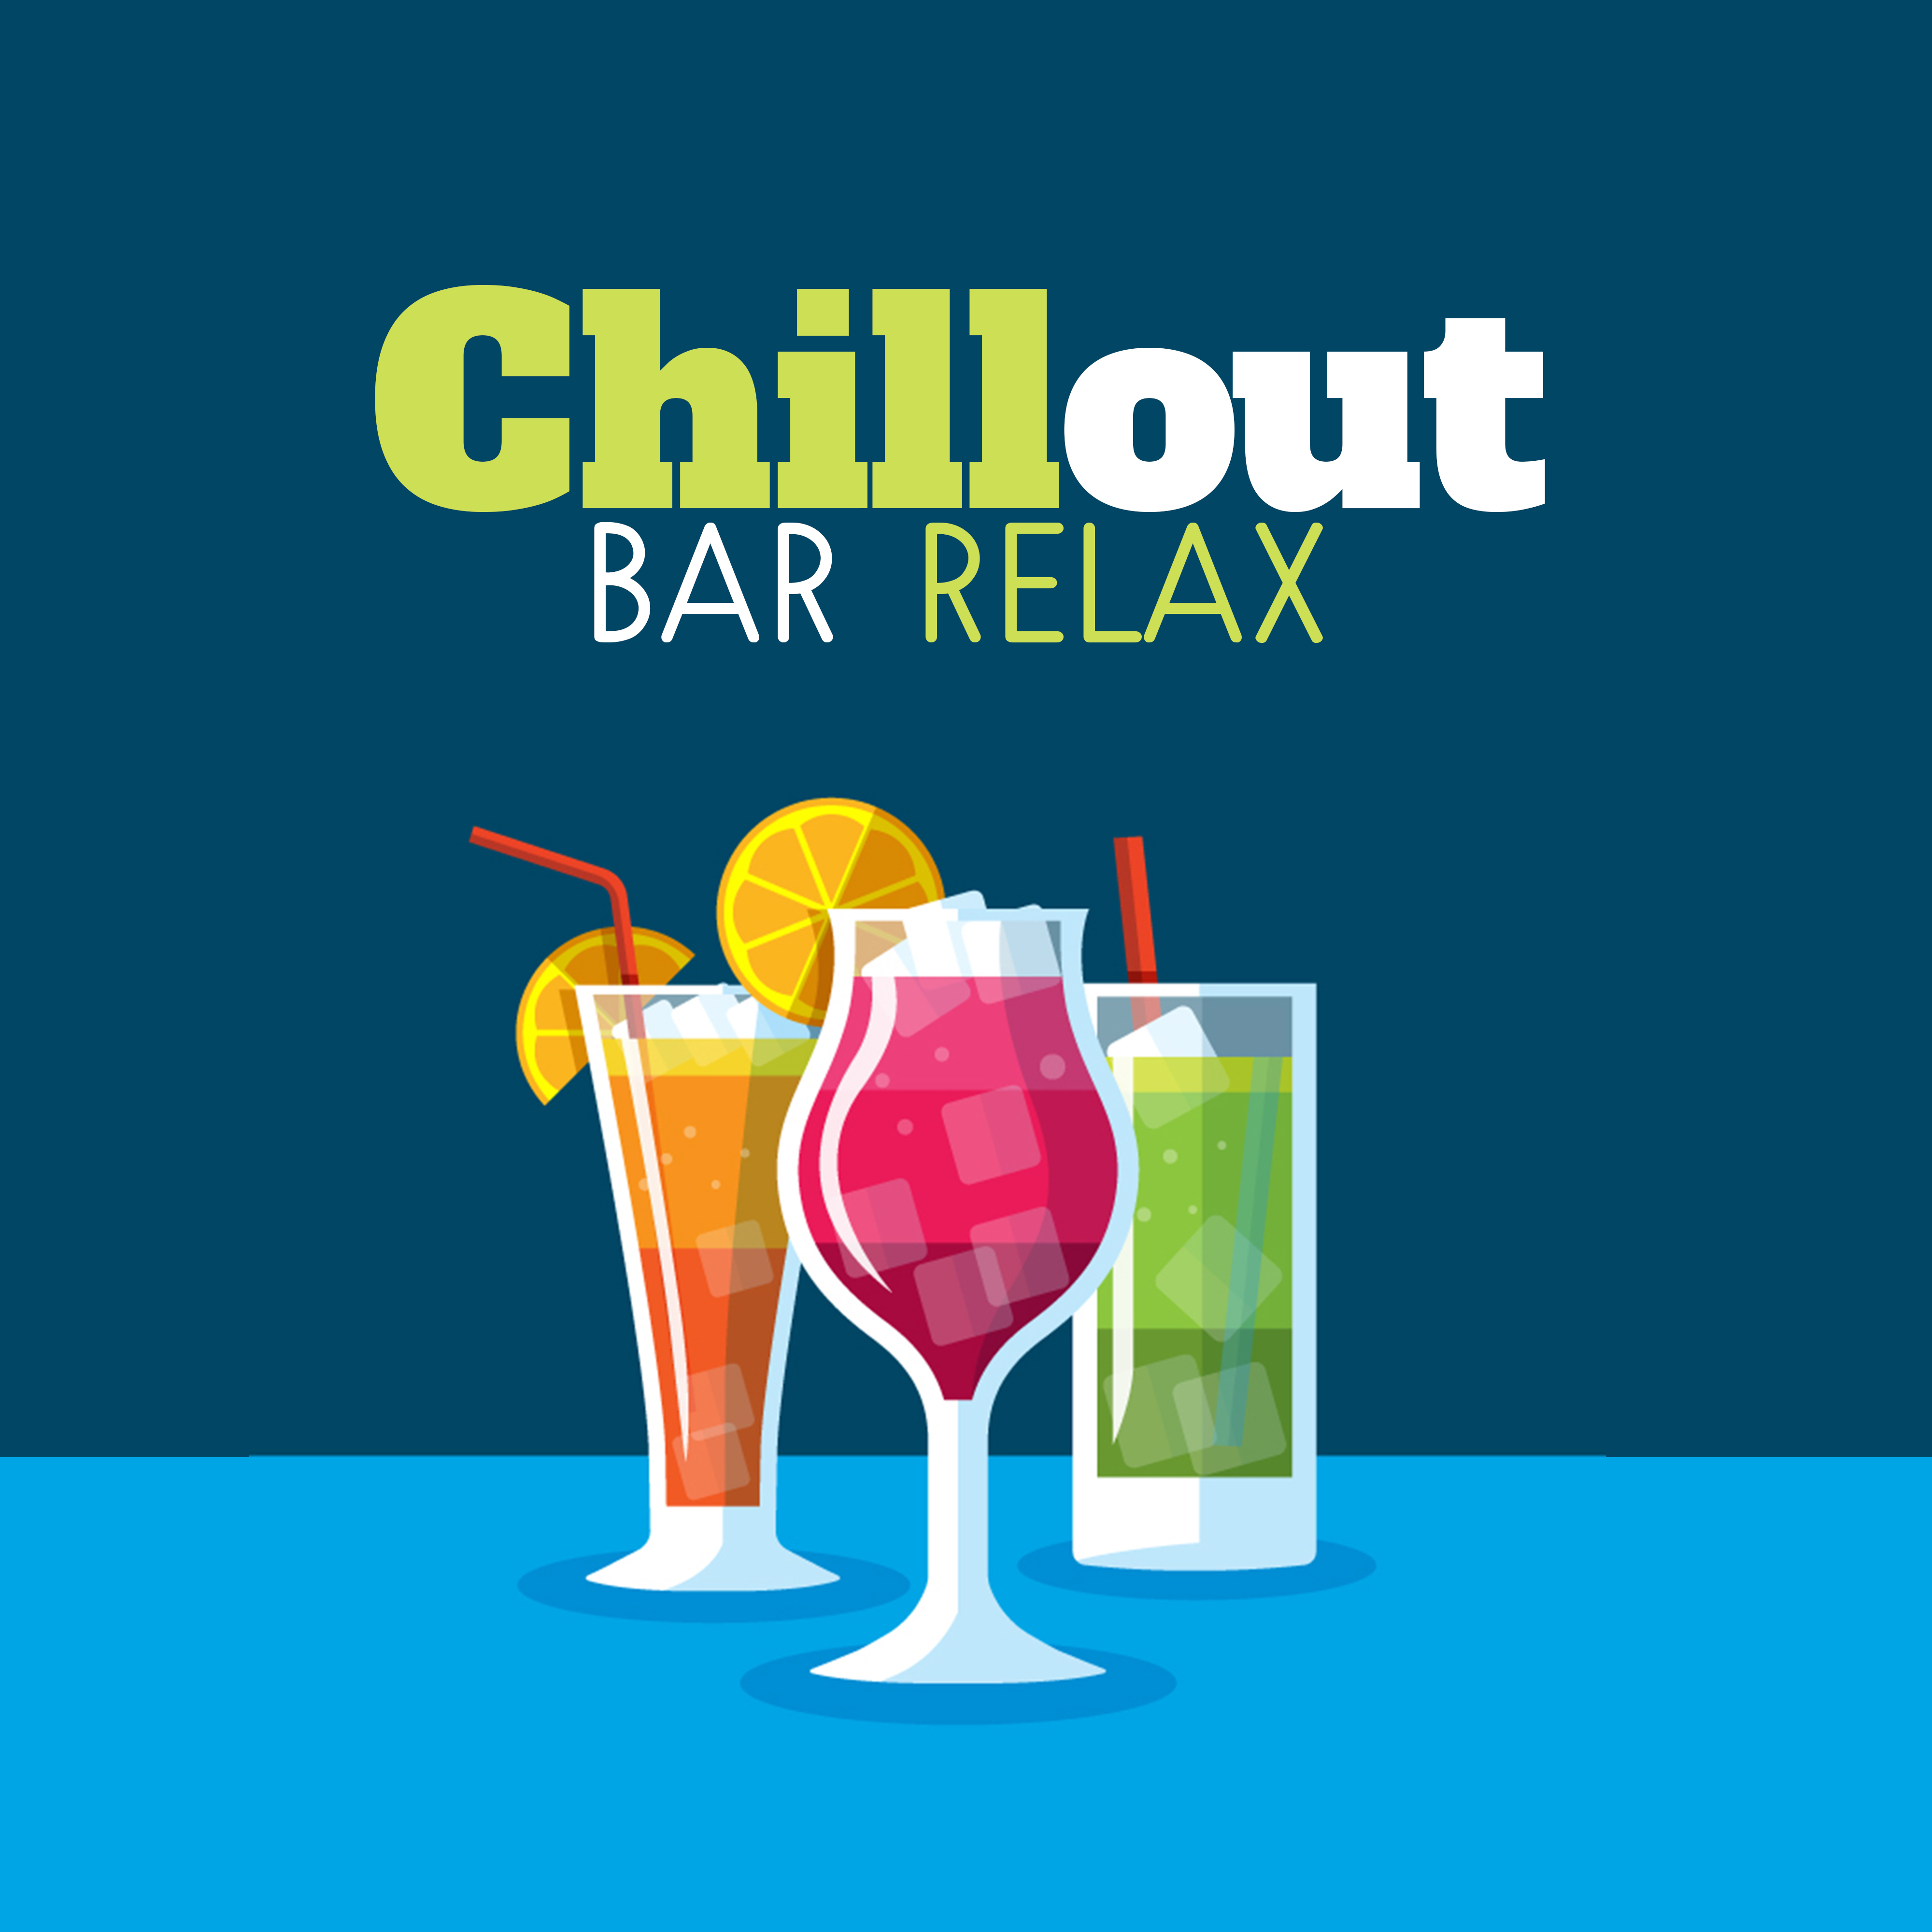 Chillout Bar Relax